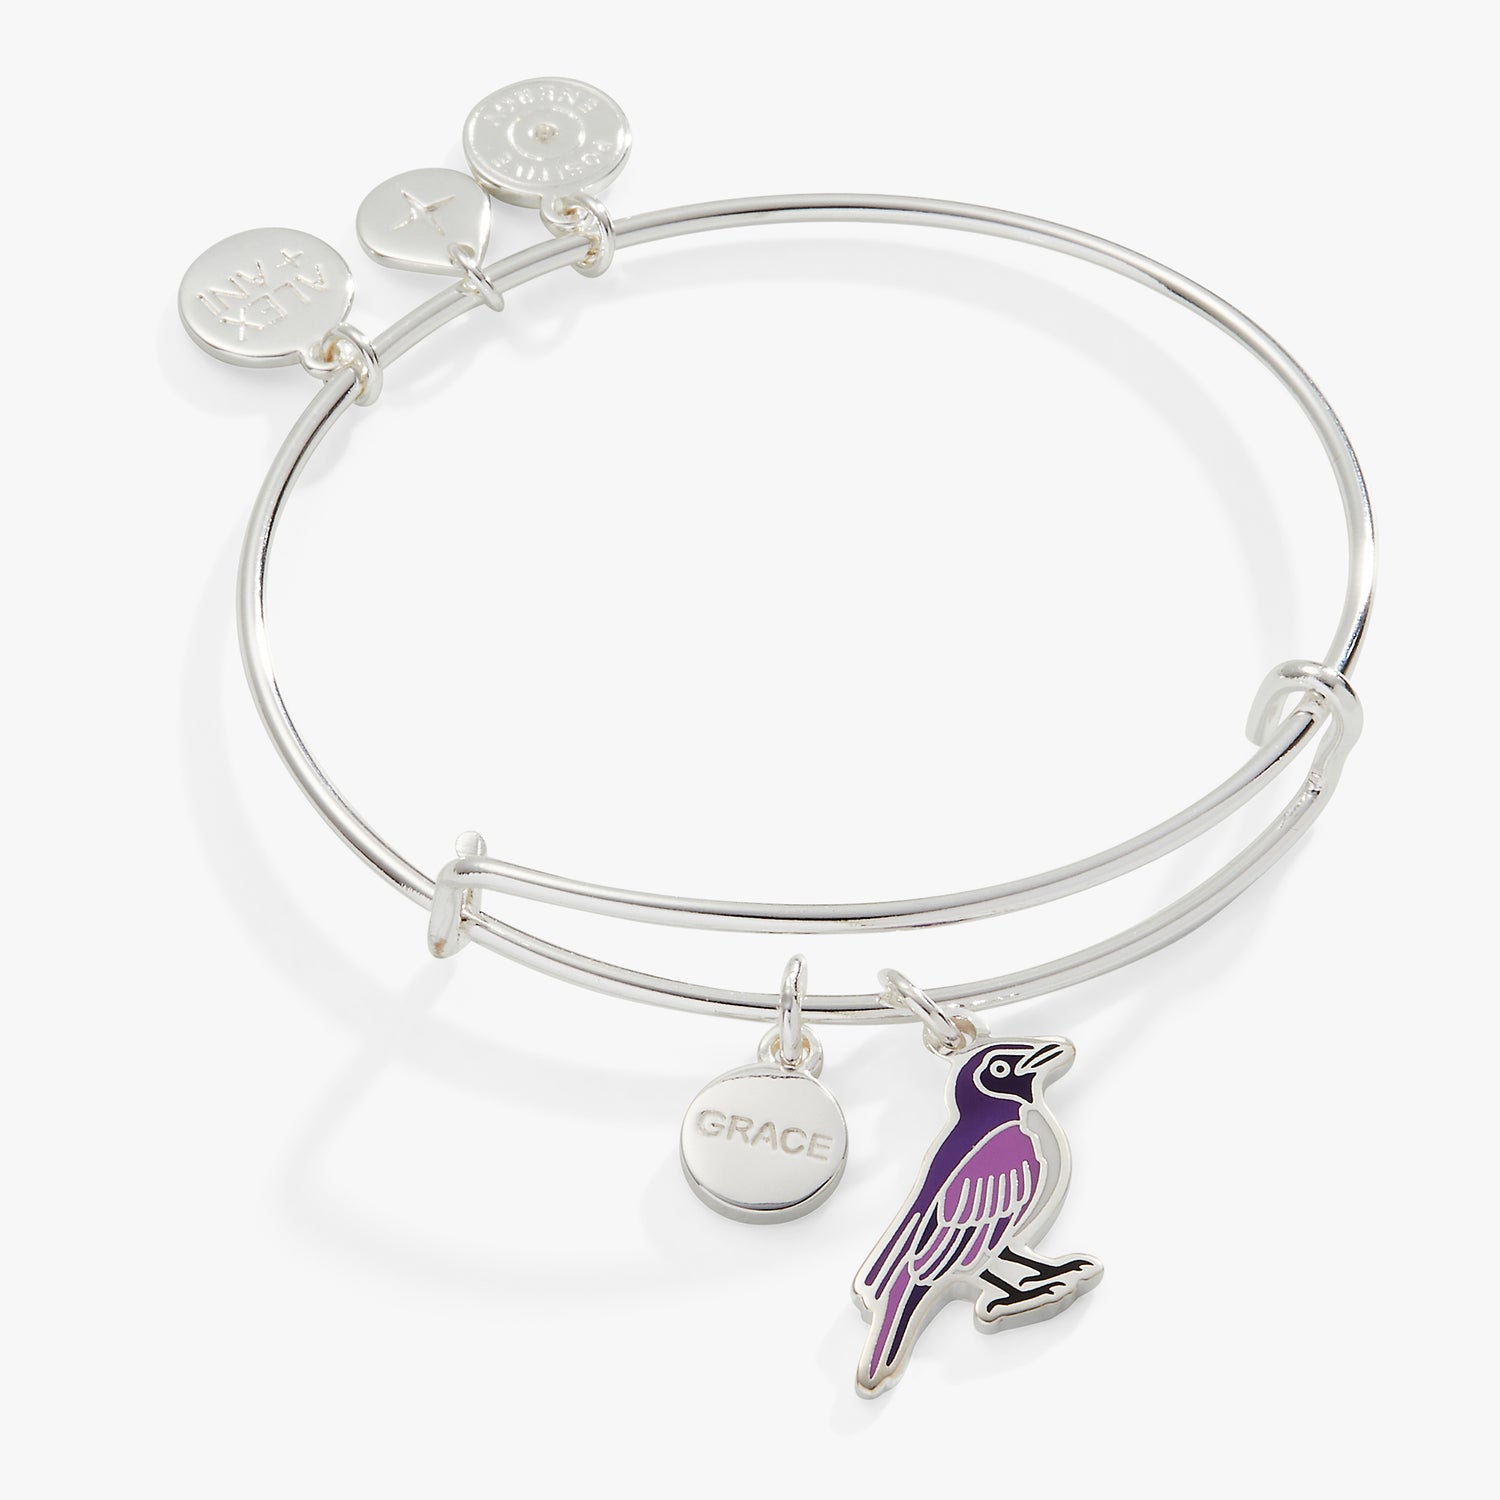 Grace' Violet Backed Starling Charm Bangle – ALEX AND ANI